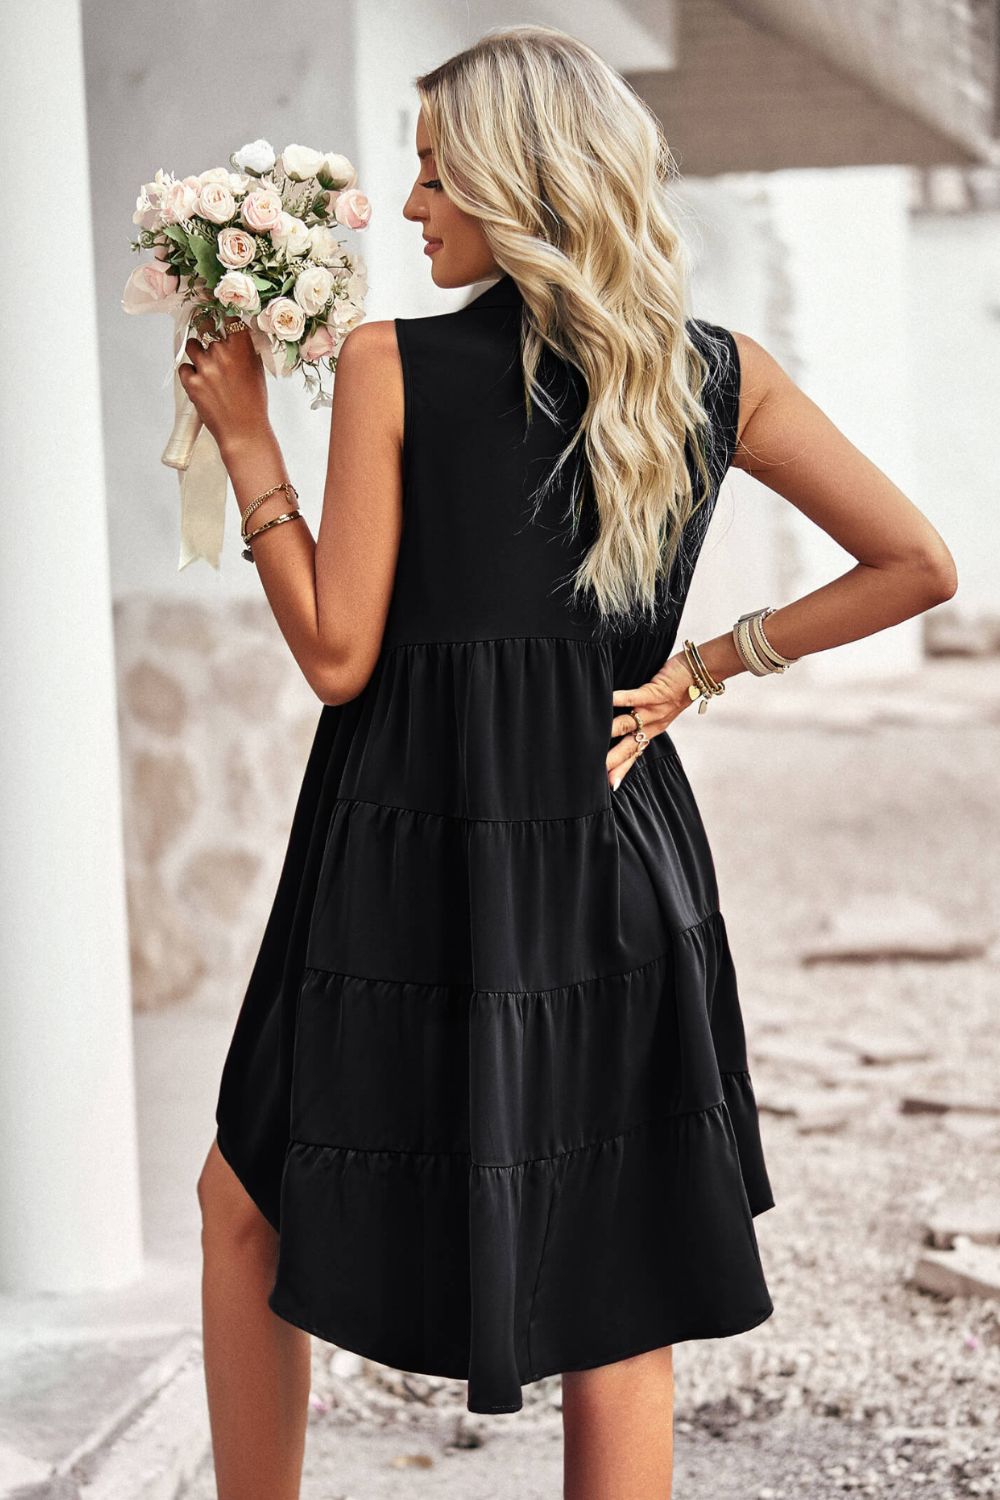 Button-Down Collared  Dress